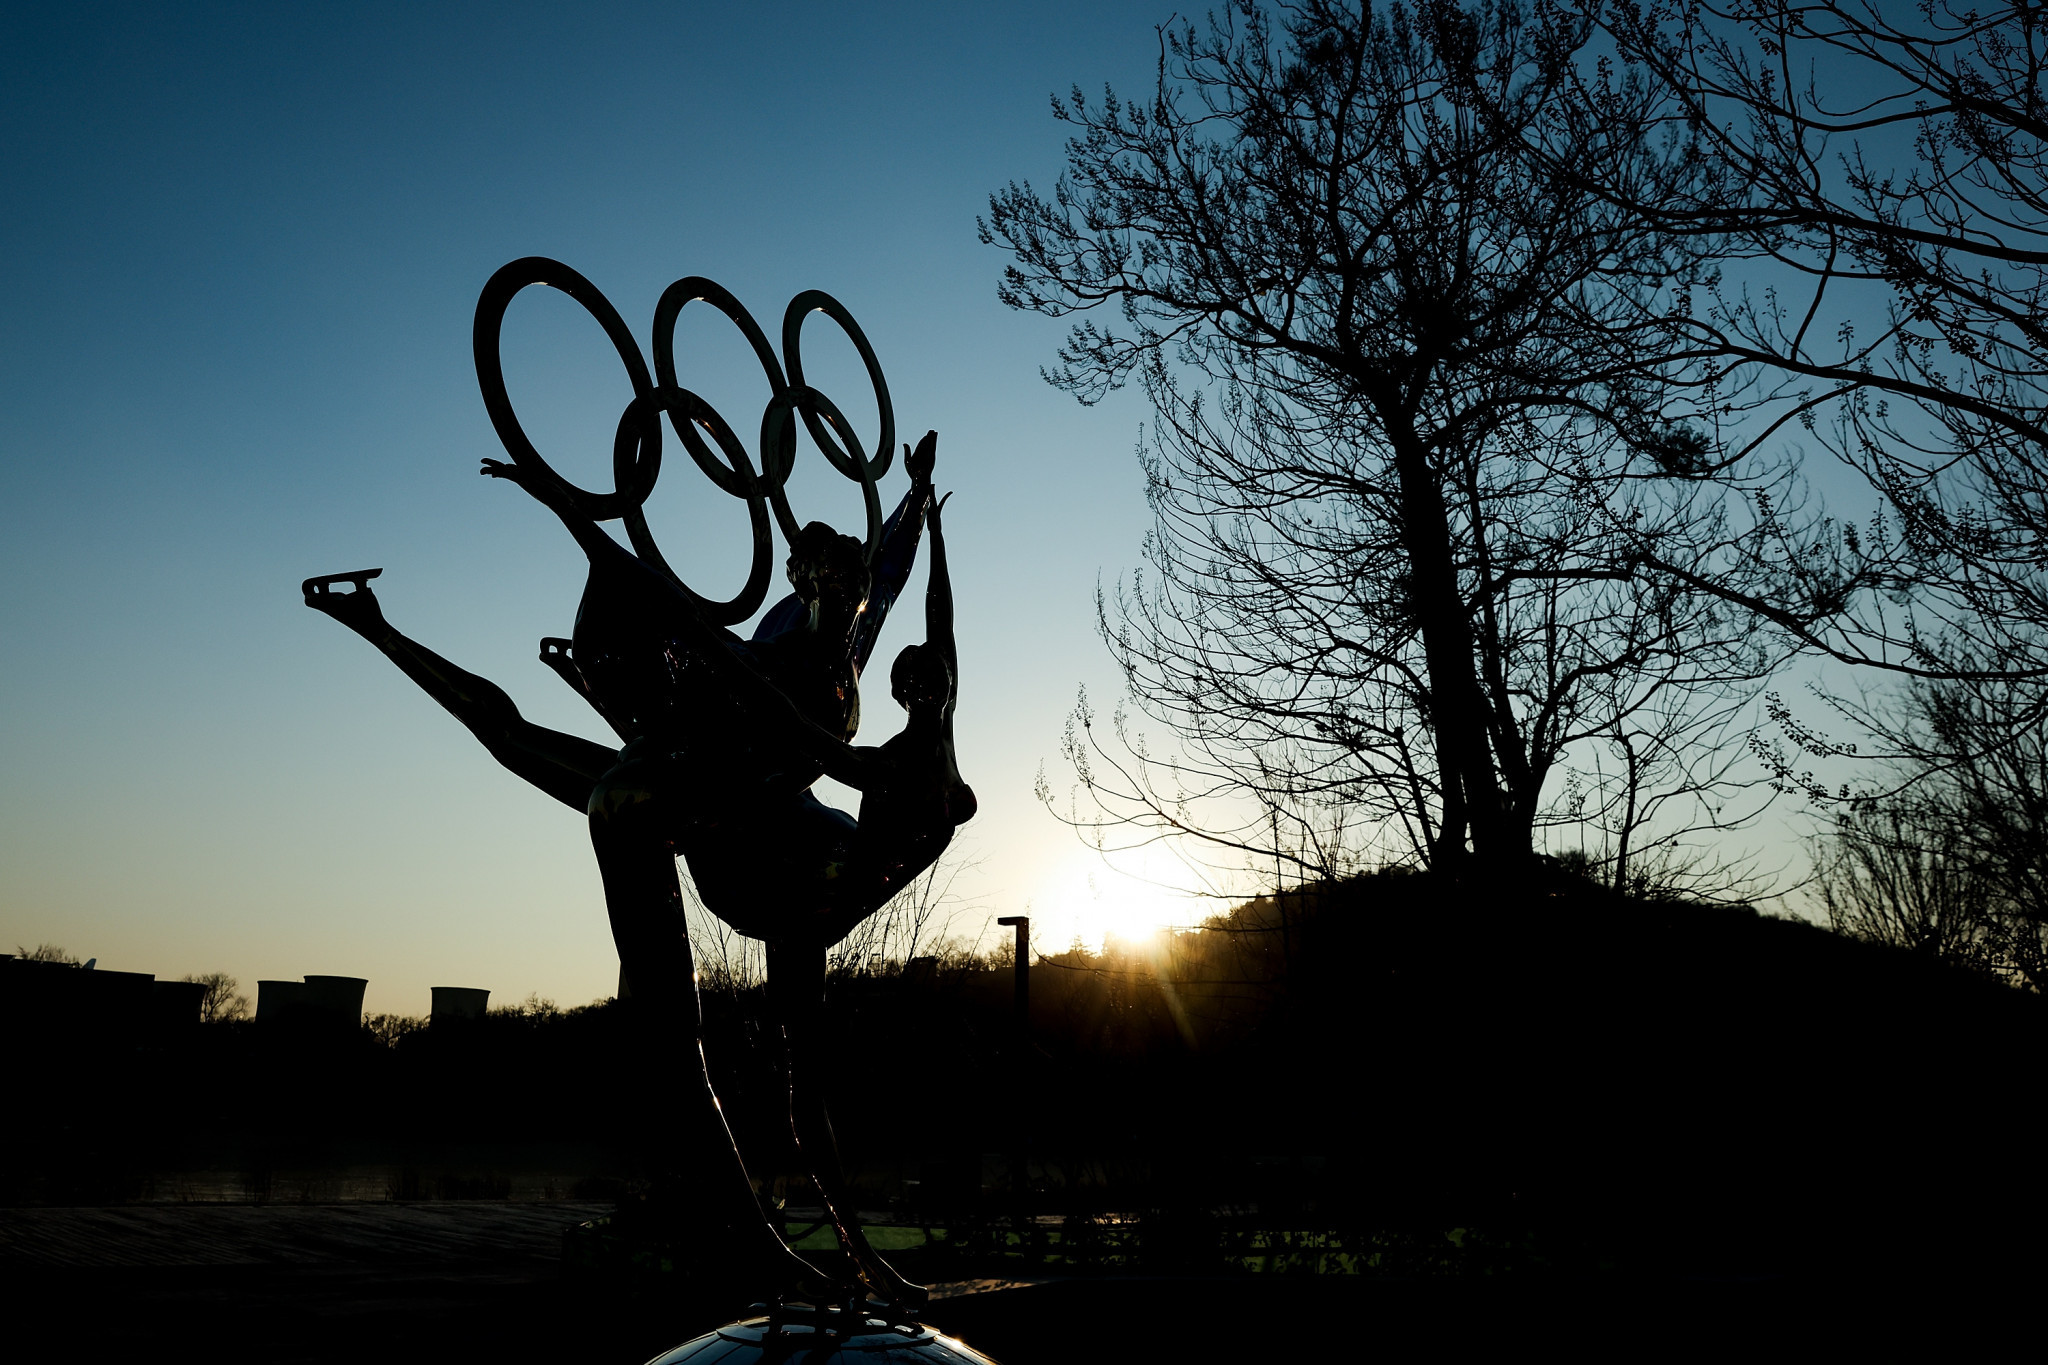 The Beijing 2022 Winter Olympic Games are due to be held next February, followed by the Winter Paralympics in March ©Getty Images